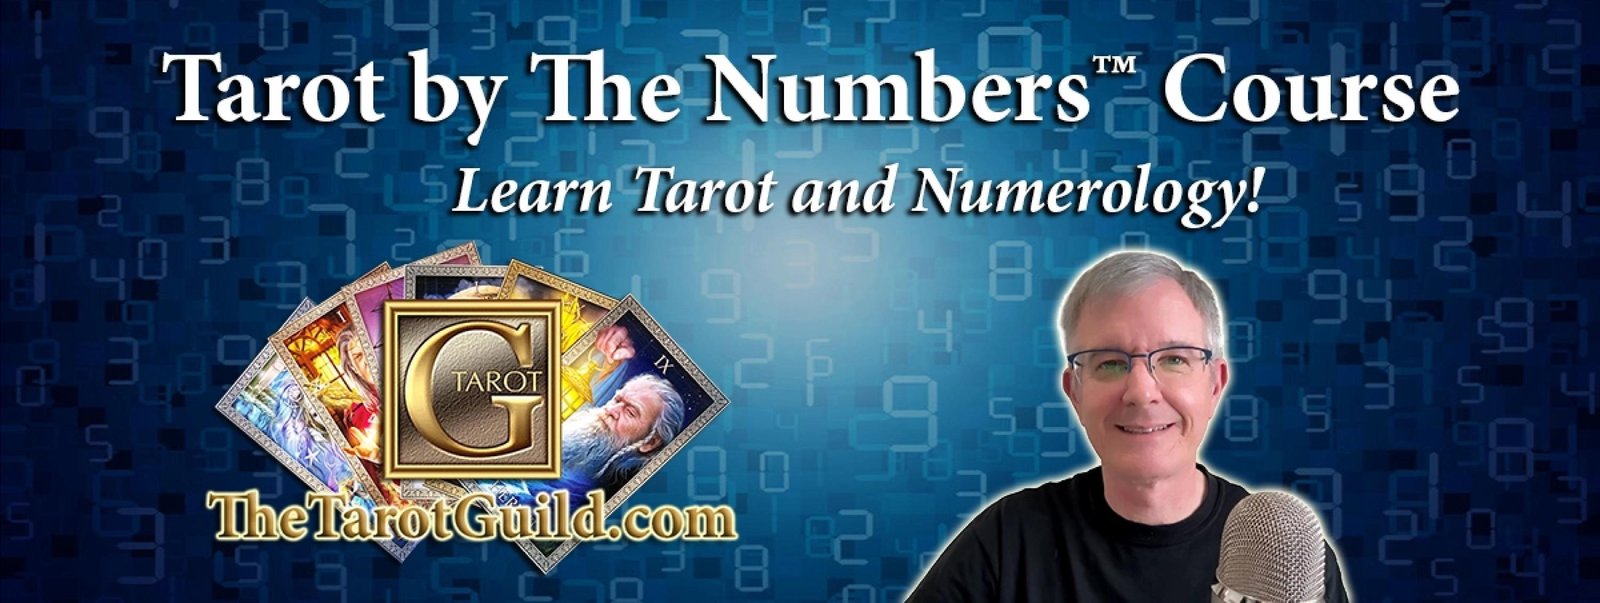 Tarot by The Numbers™ Course cover photo